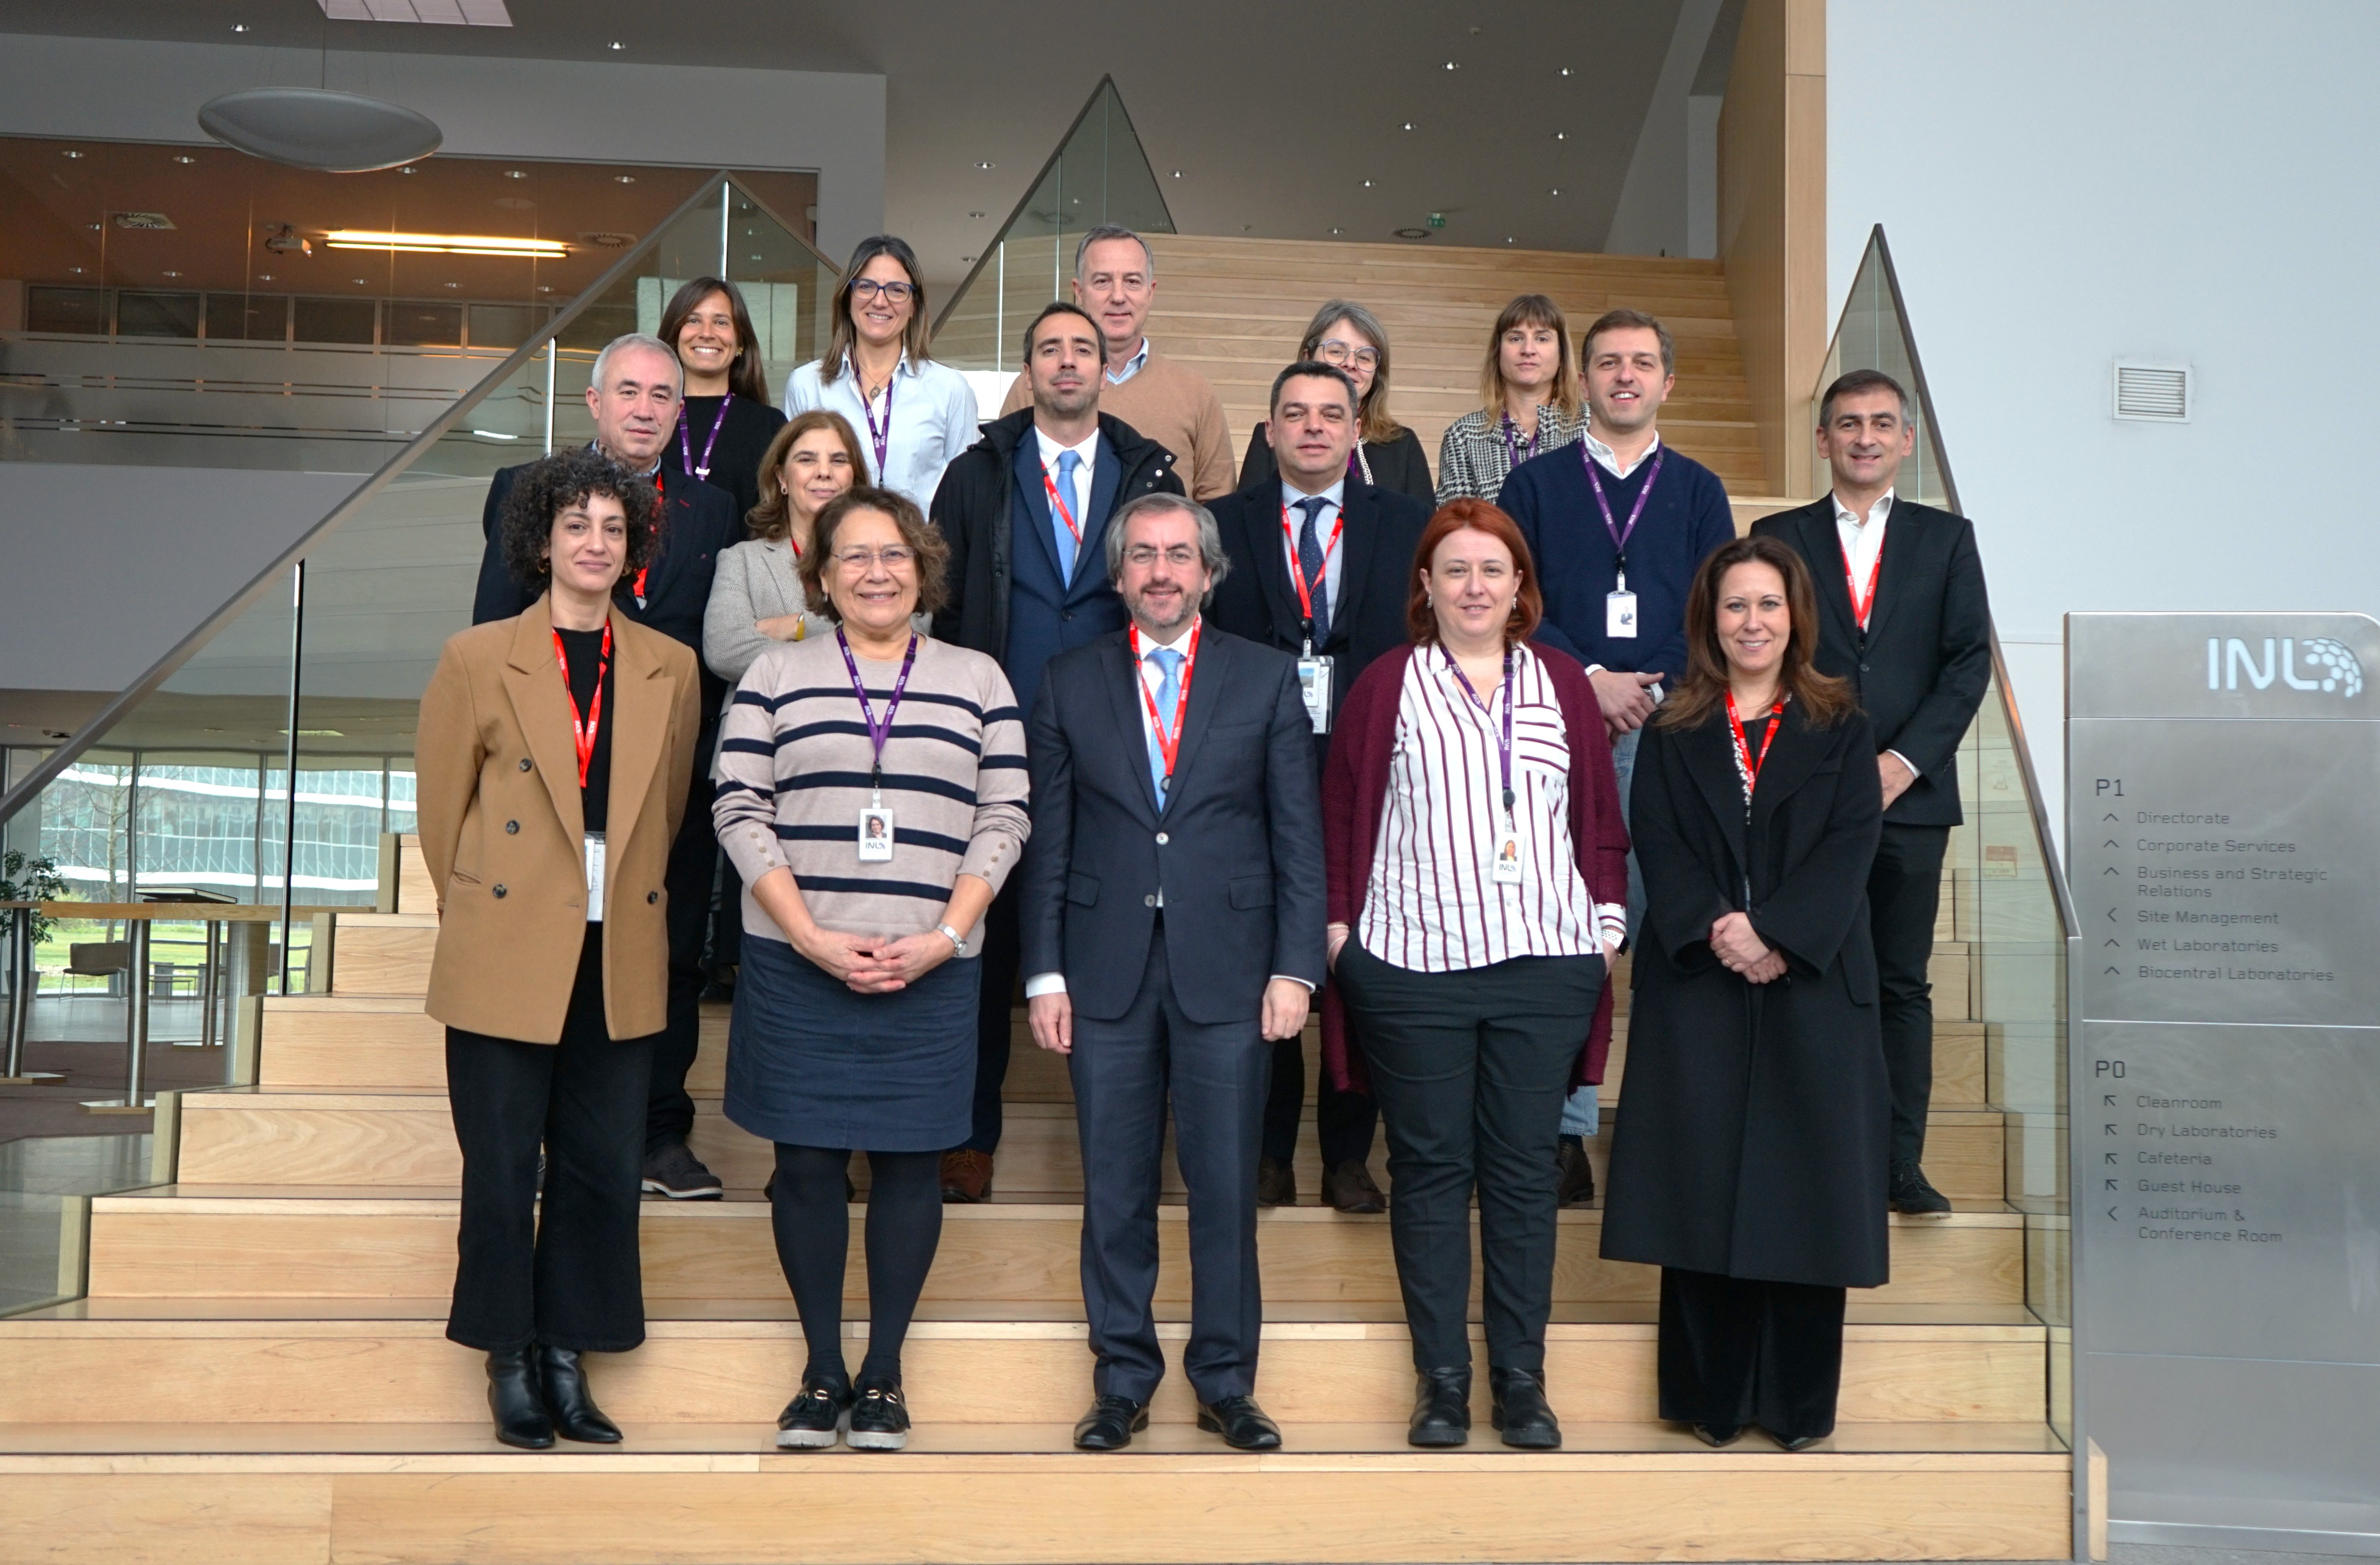 Leaders of Braga public companies meet with INL for collaborative discussions